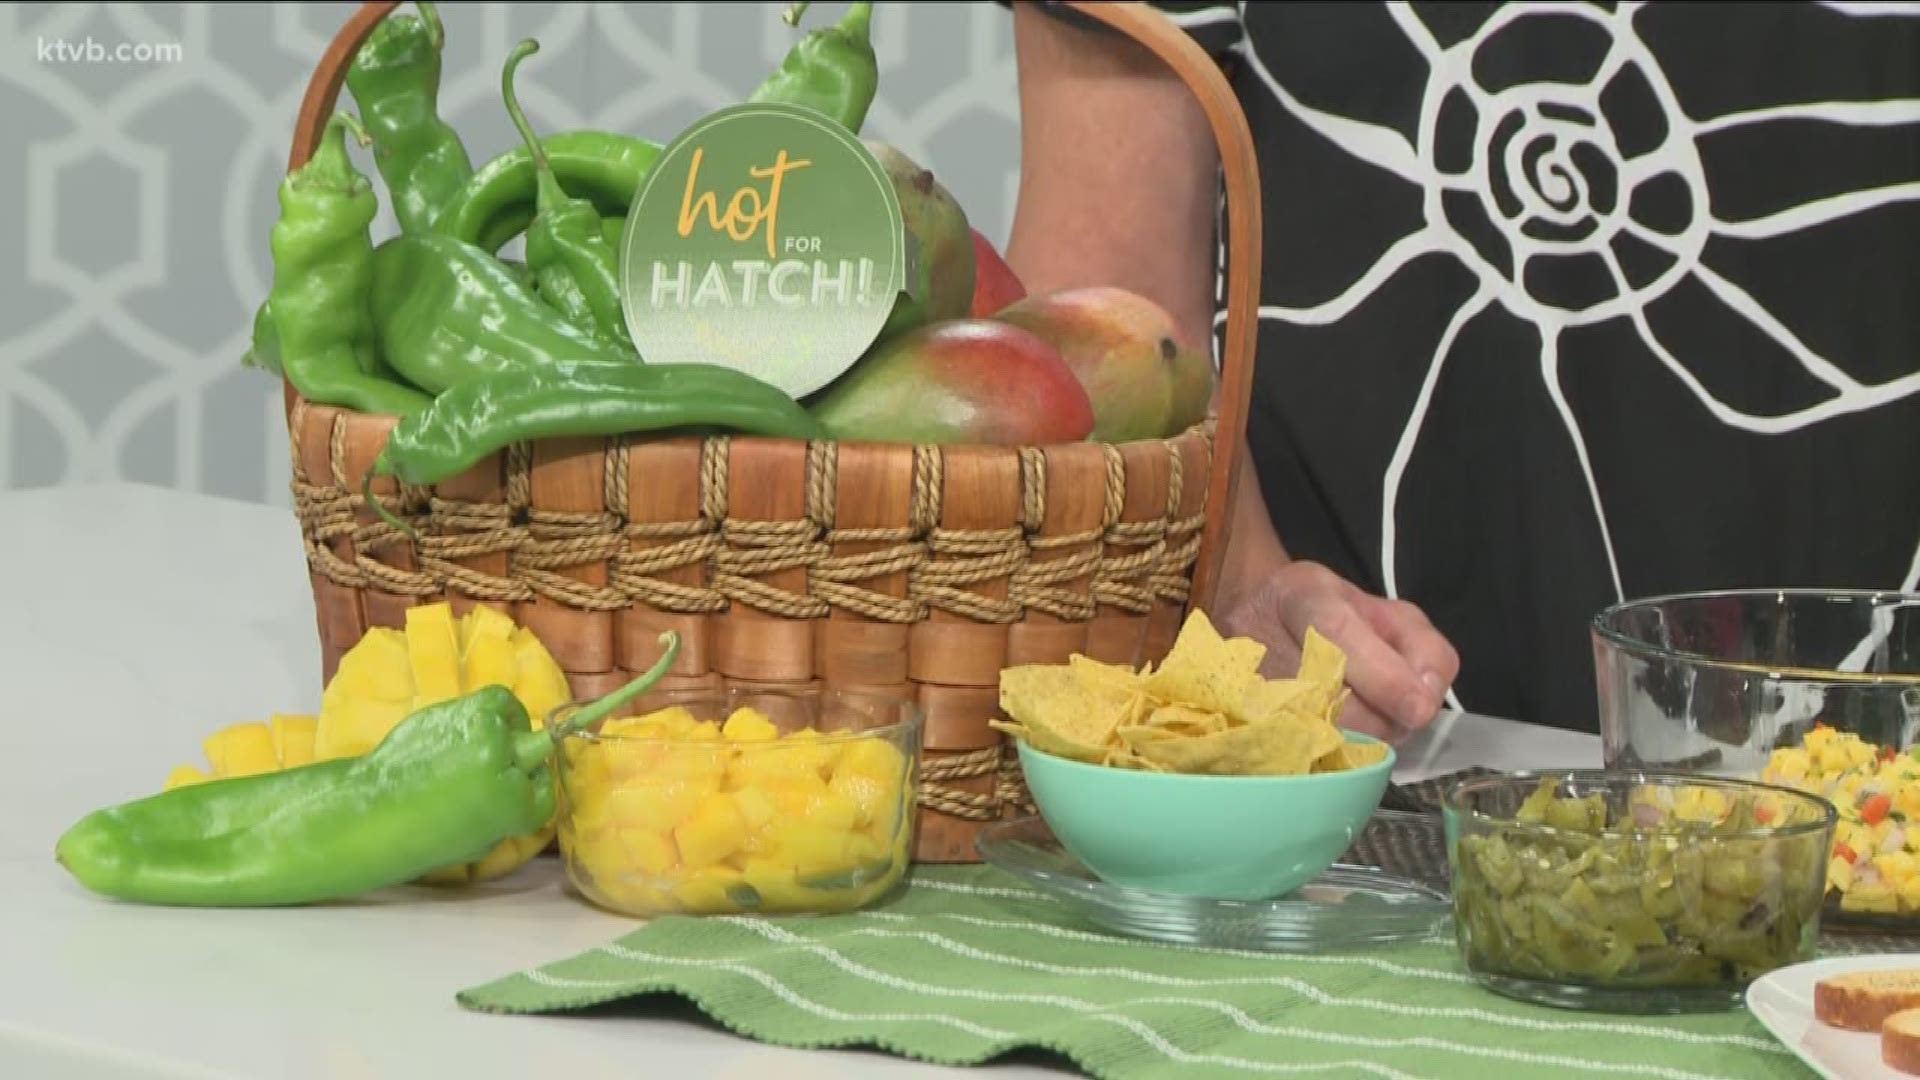 Dietitian Molly Tevis shows us some healthy recipes you can make with hatch chile peppers.